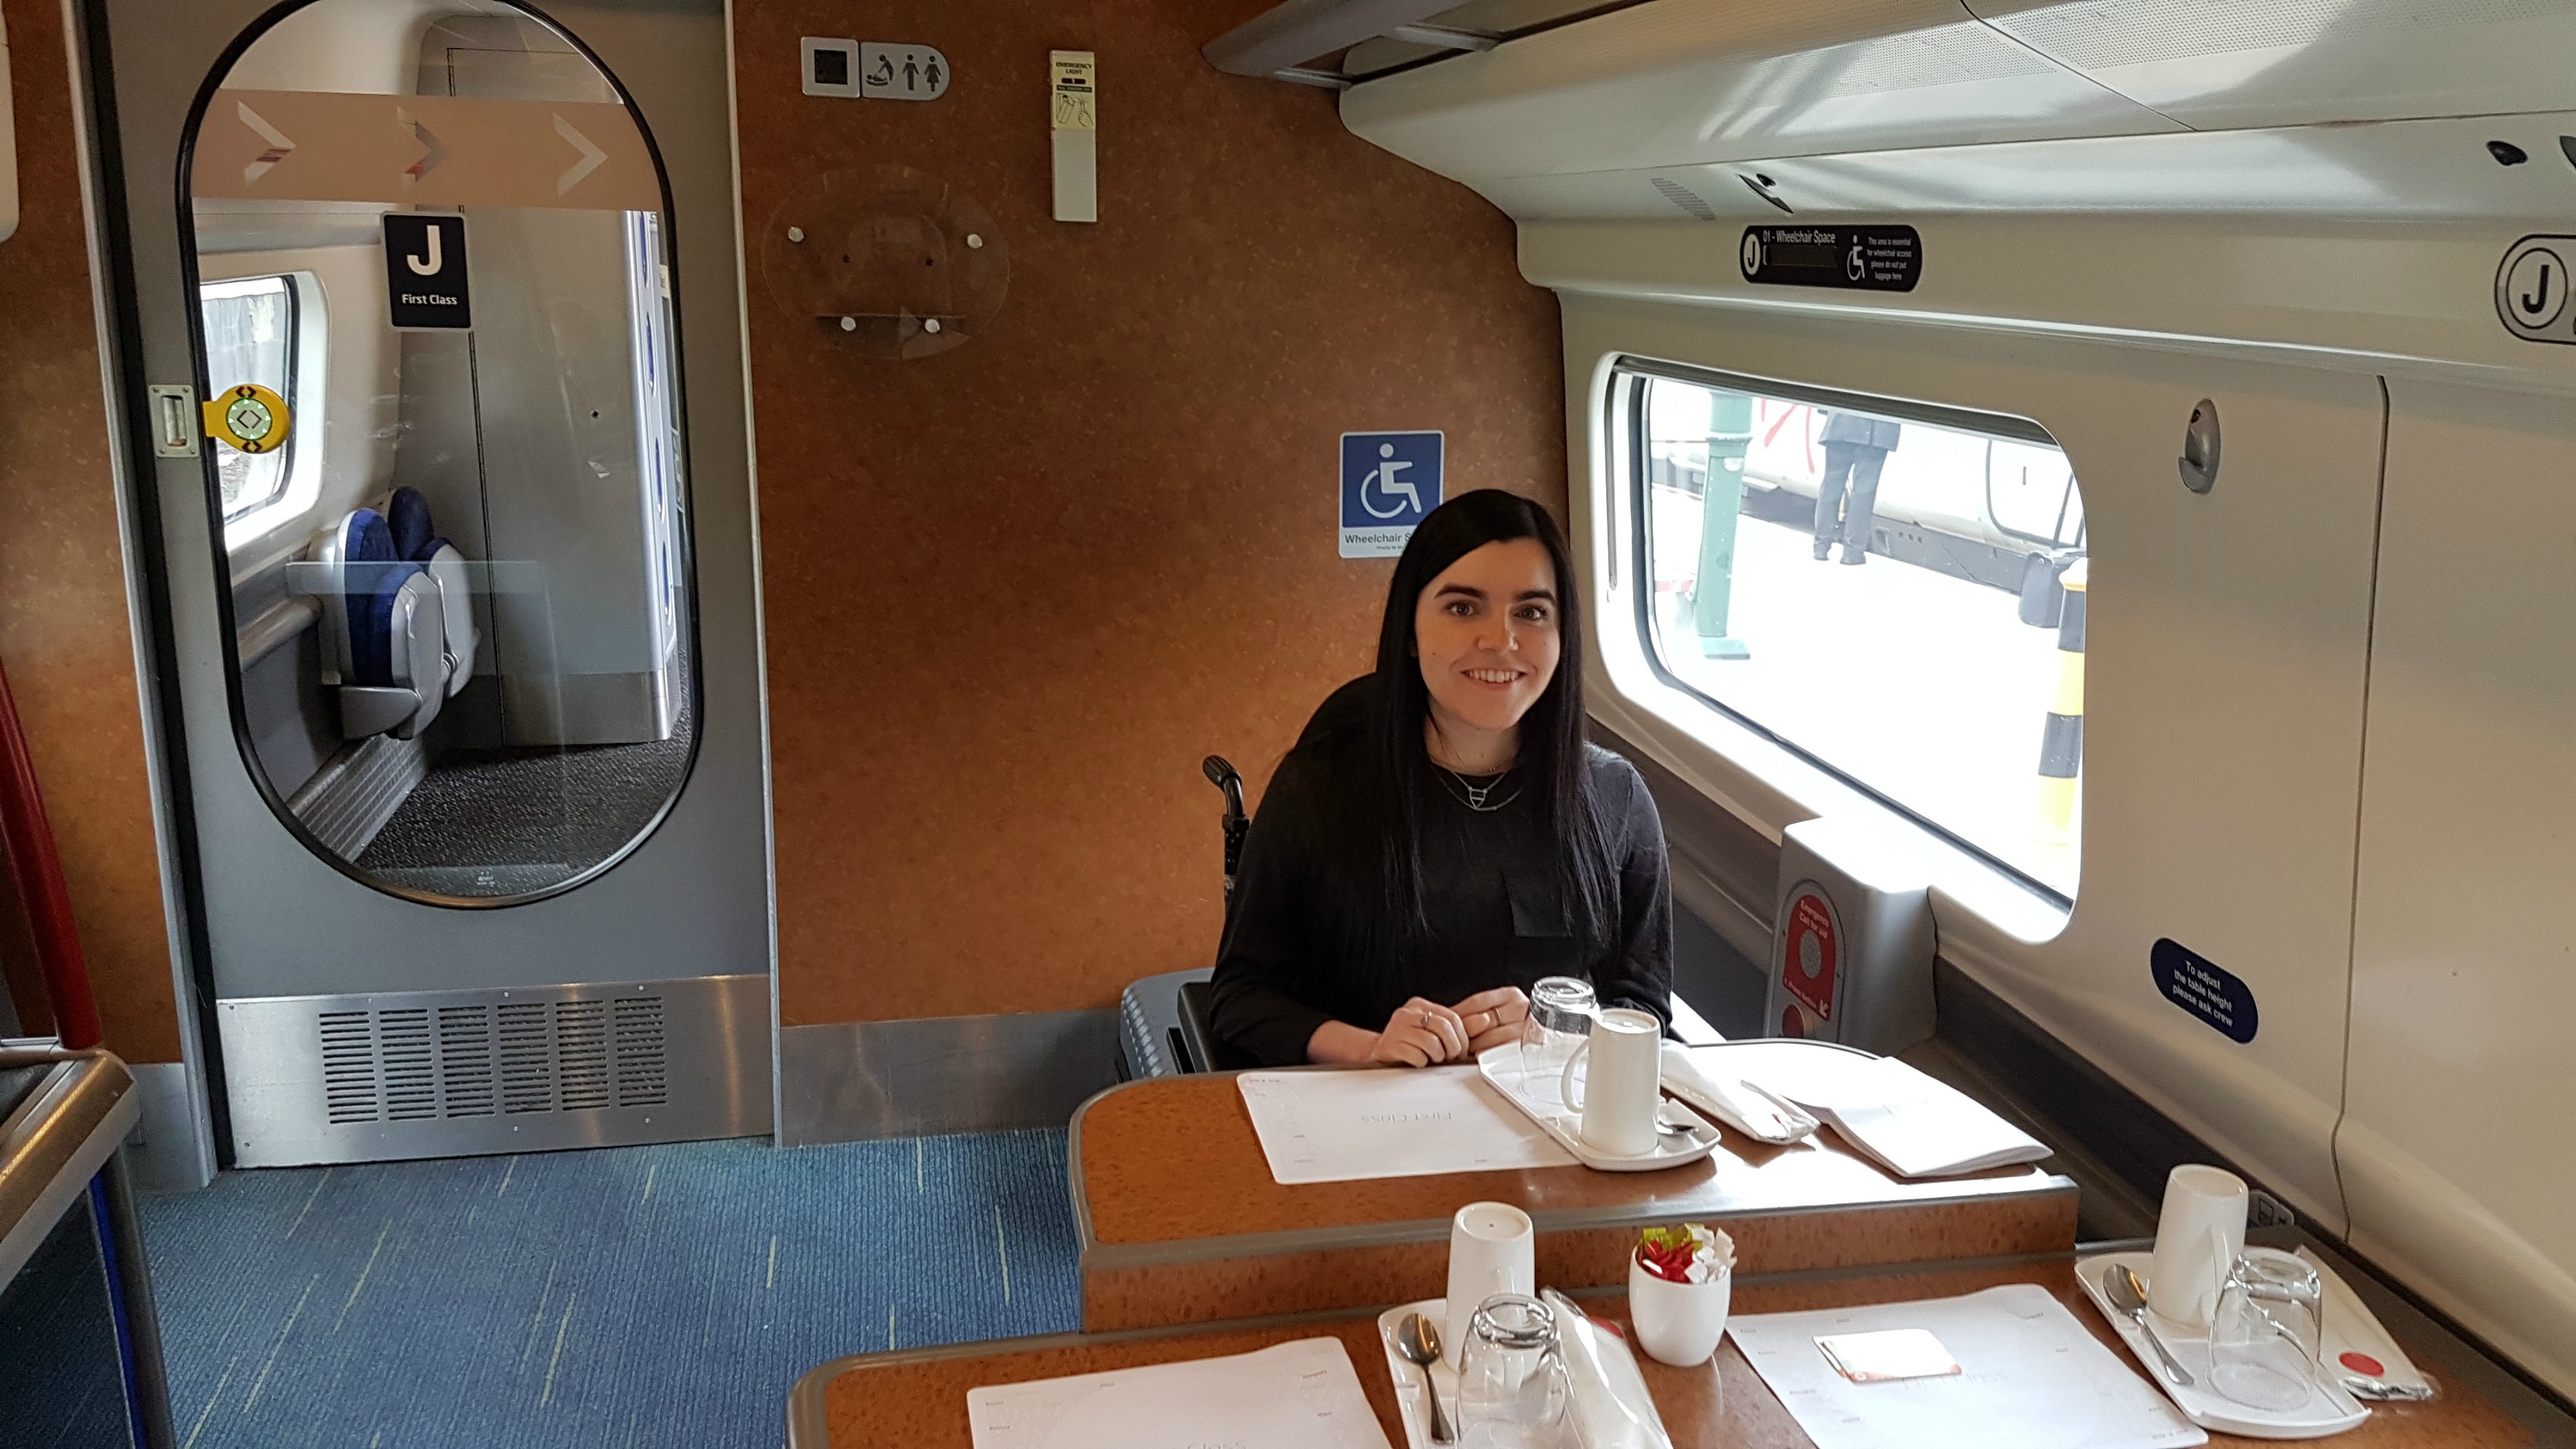 Virgin Trains first class wheelchair accessible seat onboard